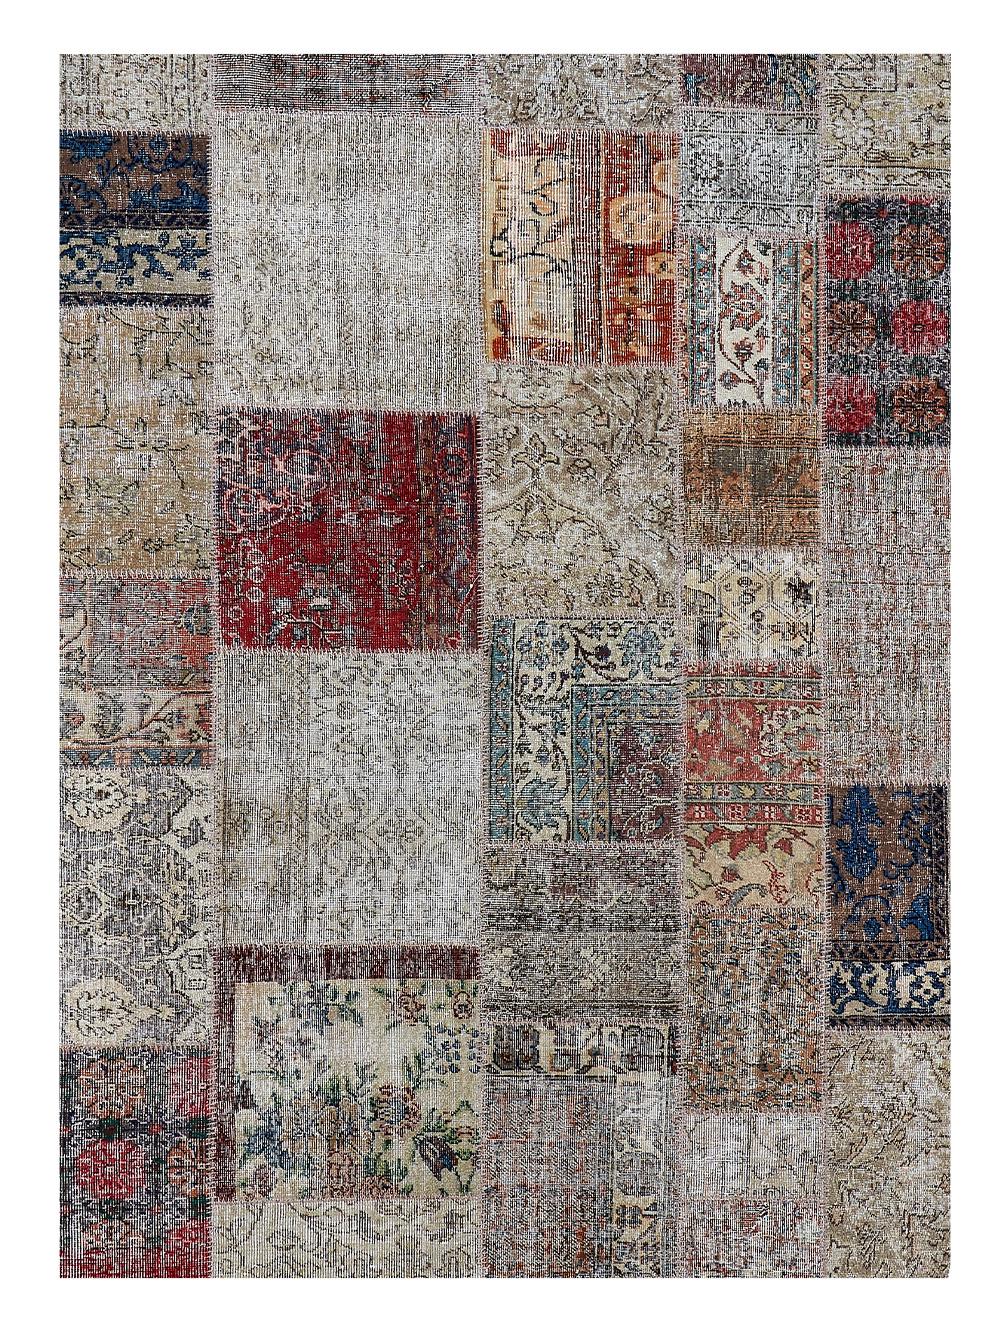 Natural strong vintage carpet by Massimo Copenhagen
Handknotted
Materials: 100% Wool
Dimensions: W 300 x H 400 cm
Available colors: Natural Light, Natural Strong, Grey.
Other dimensions are available: 80x250 cm, 140x200 cm, 170x240 cm, 200x300